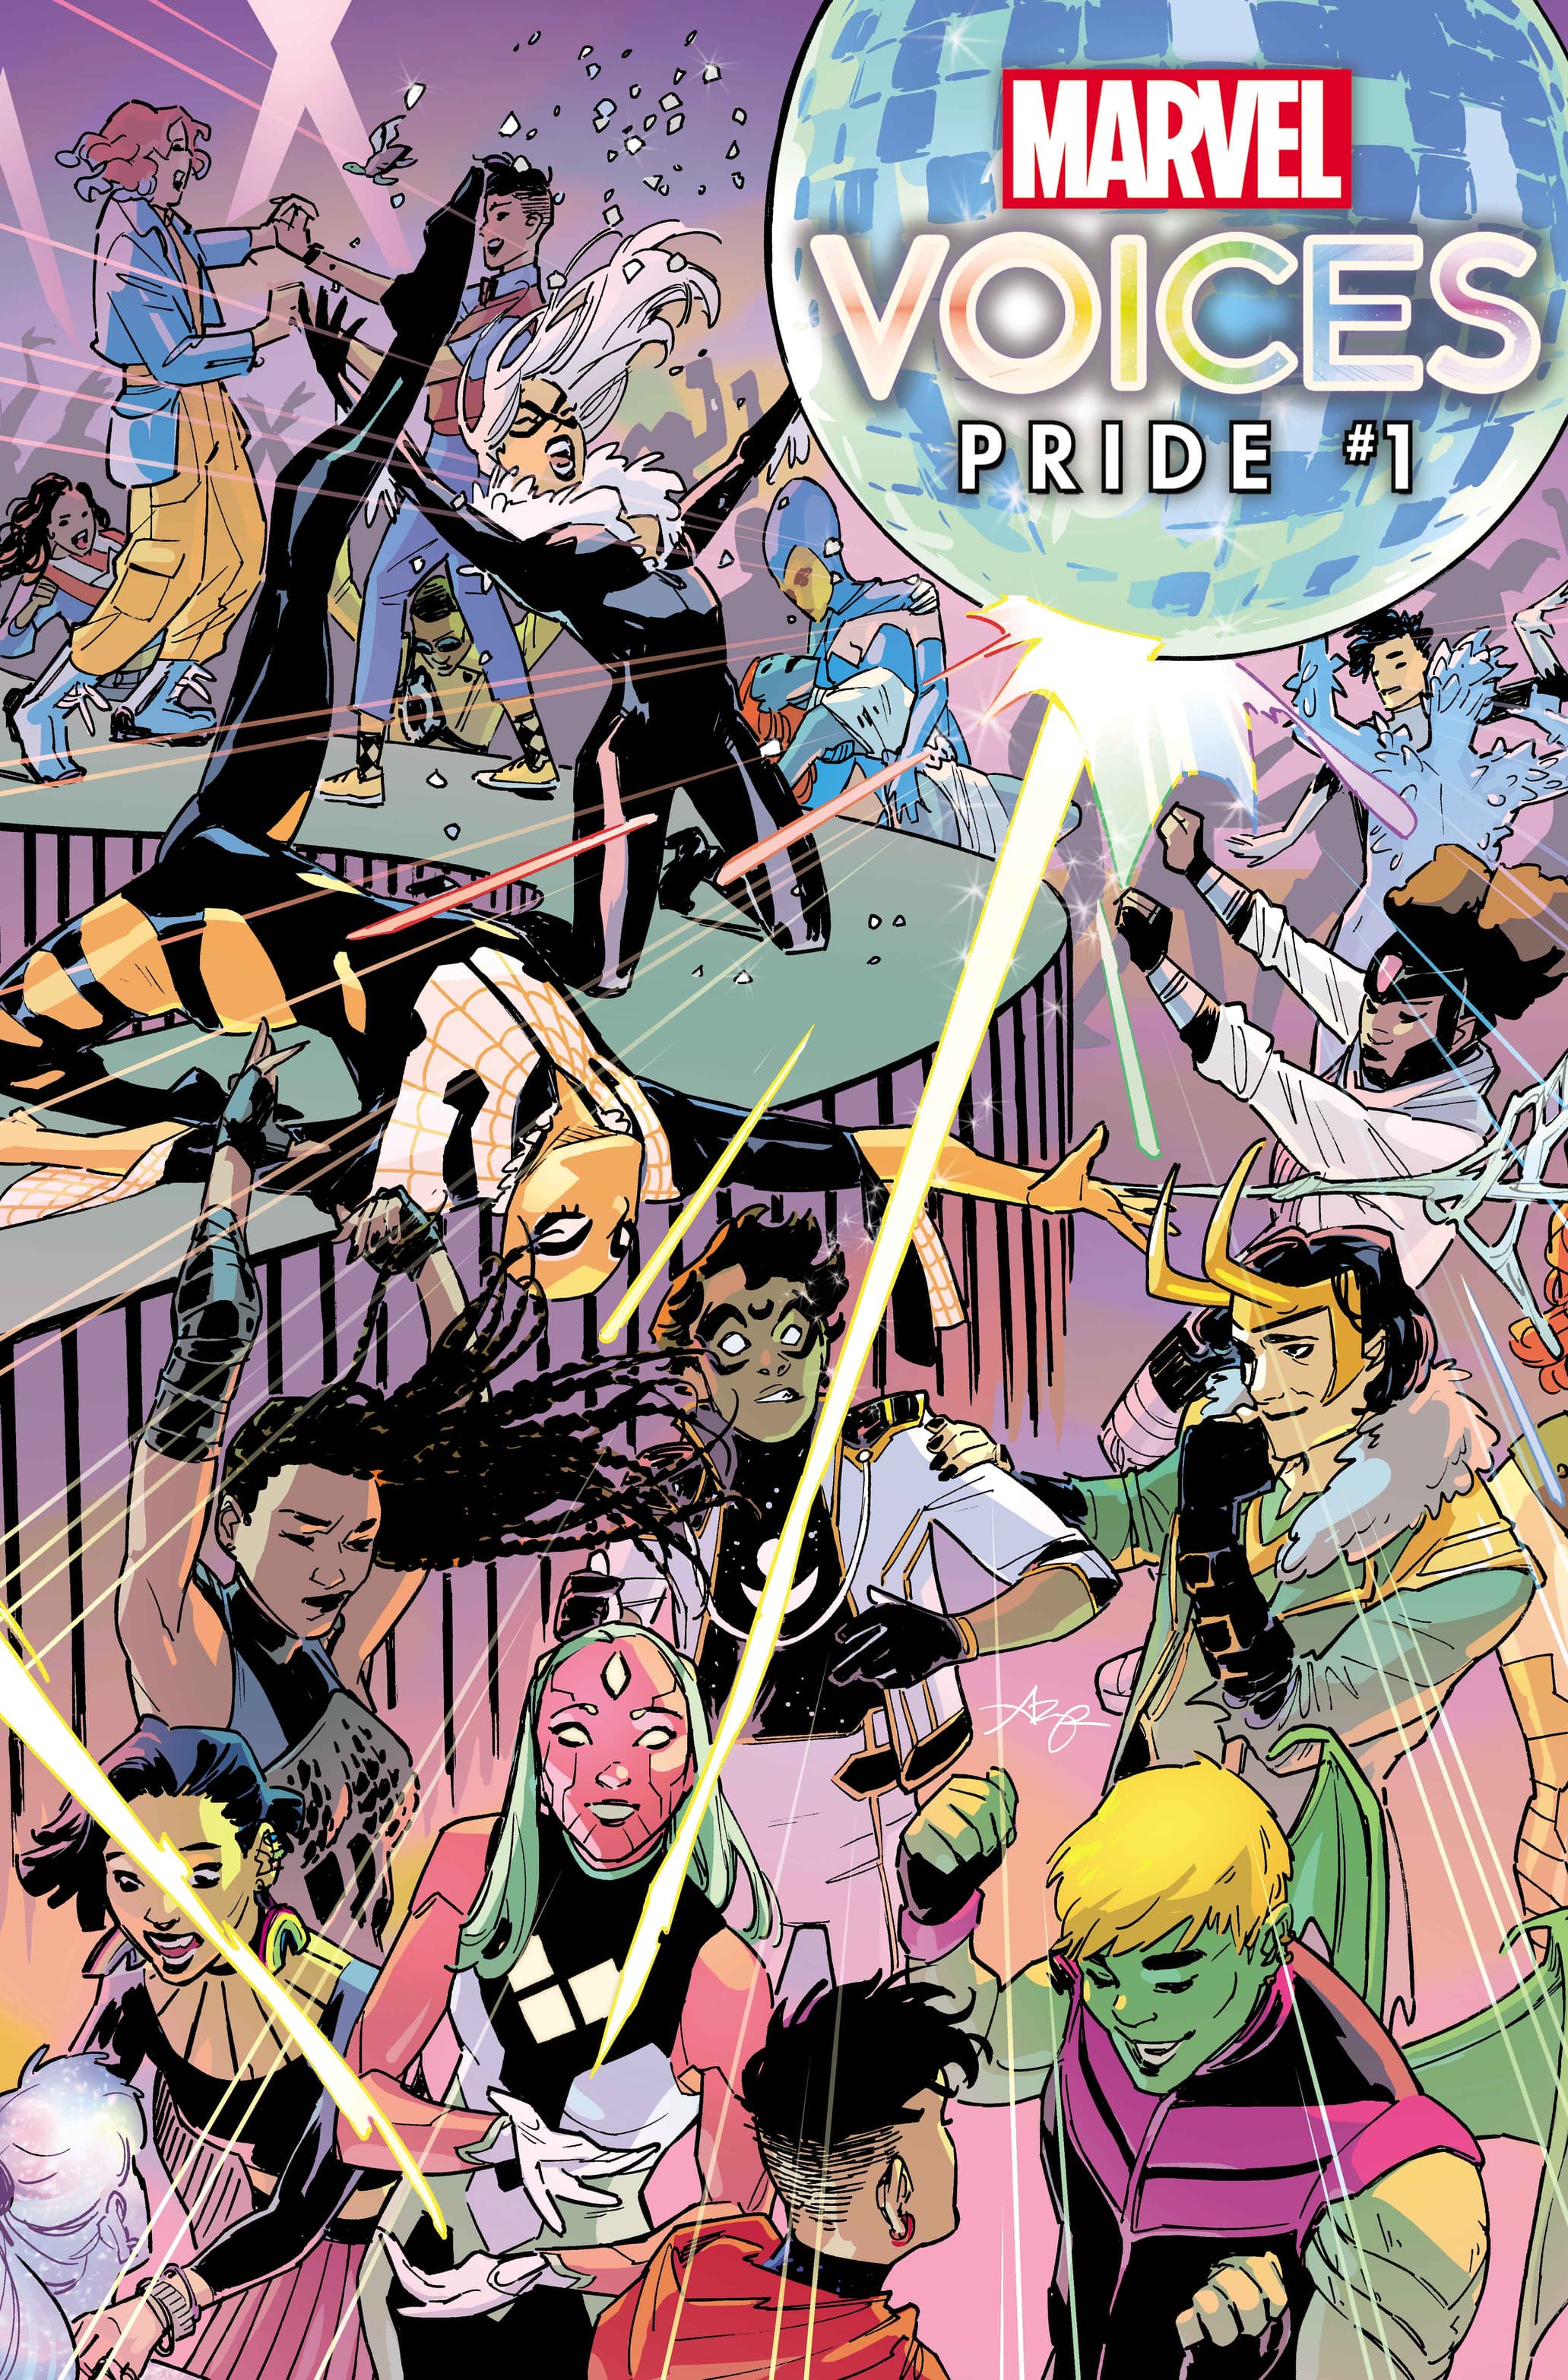 Marvel's Voices Pride #1 cover by Amy Reeder